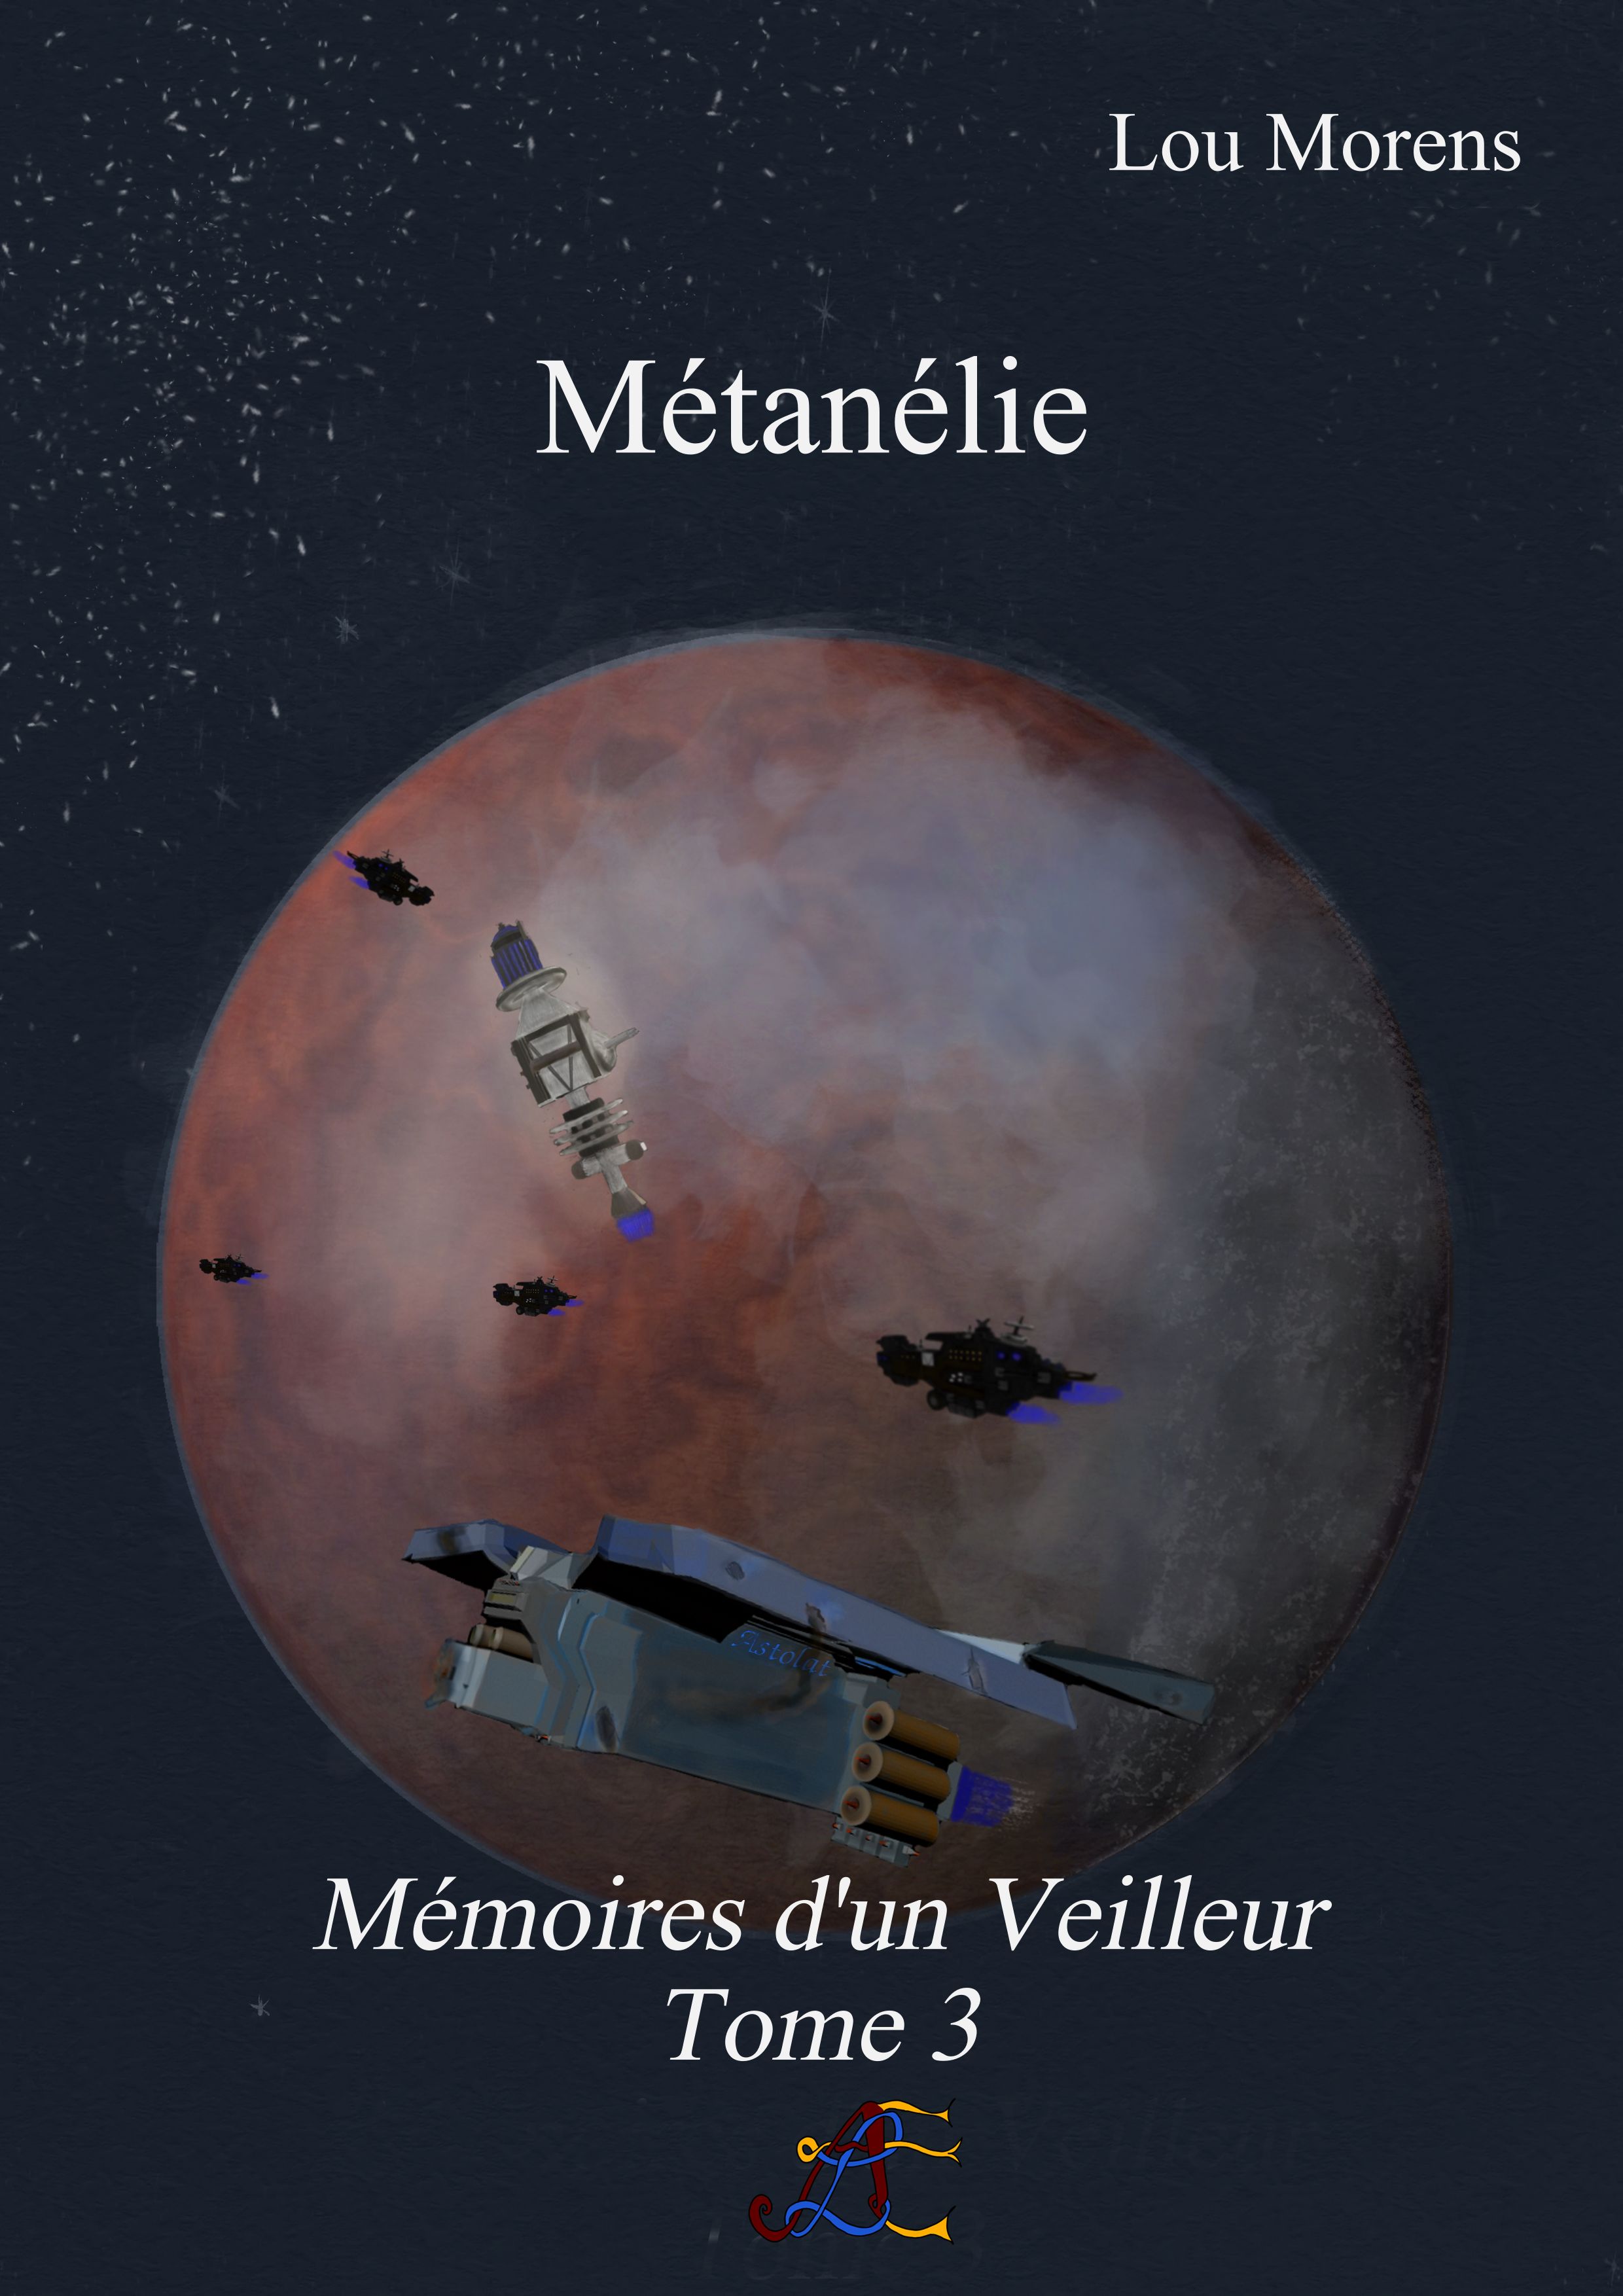 Metanelie official cover